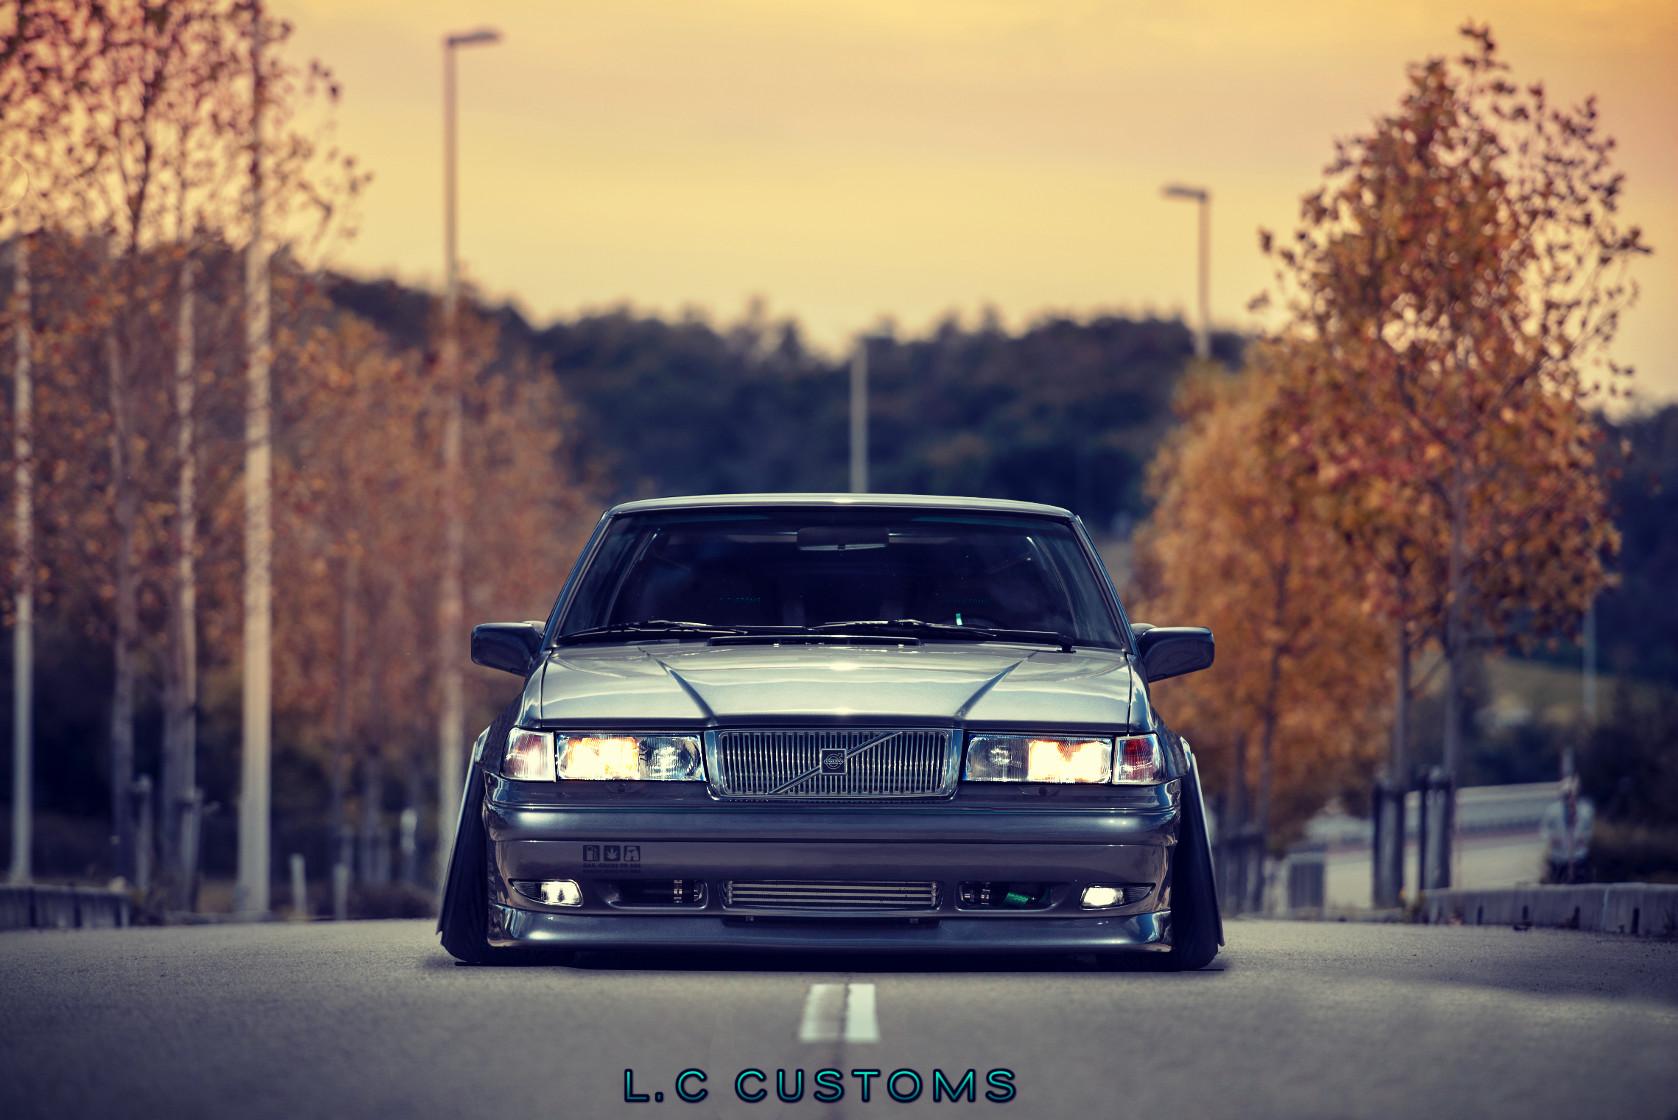 L.C CUSTOMS 960 With huge camber // Wallpaper